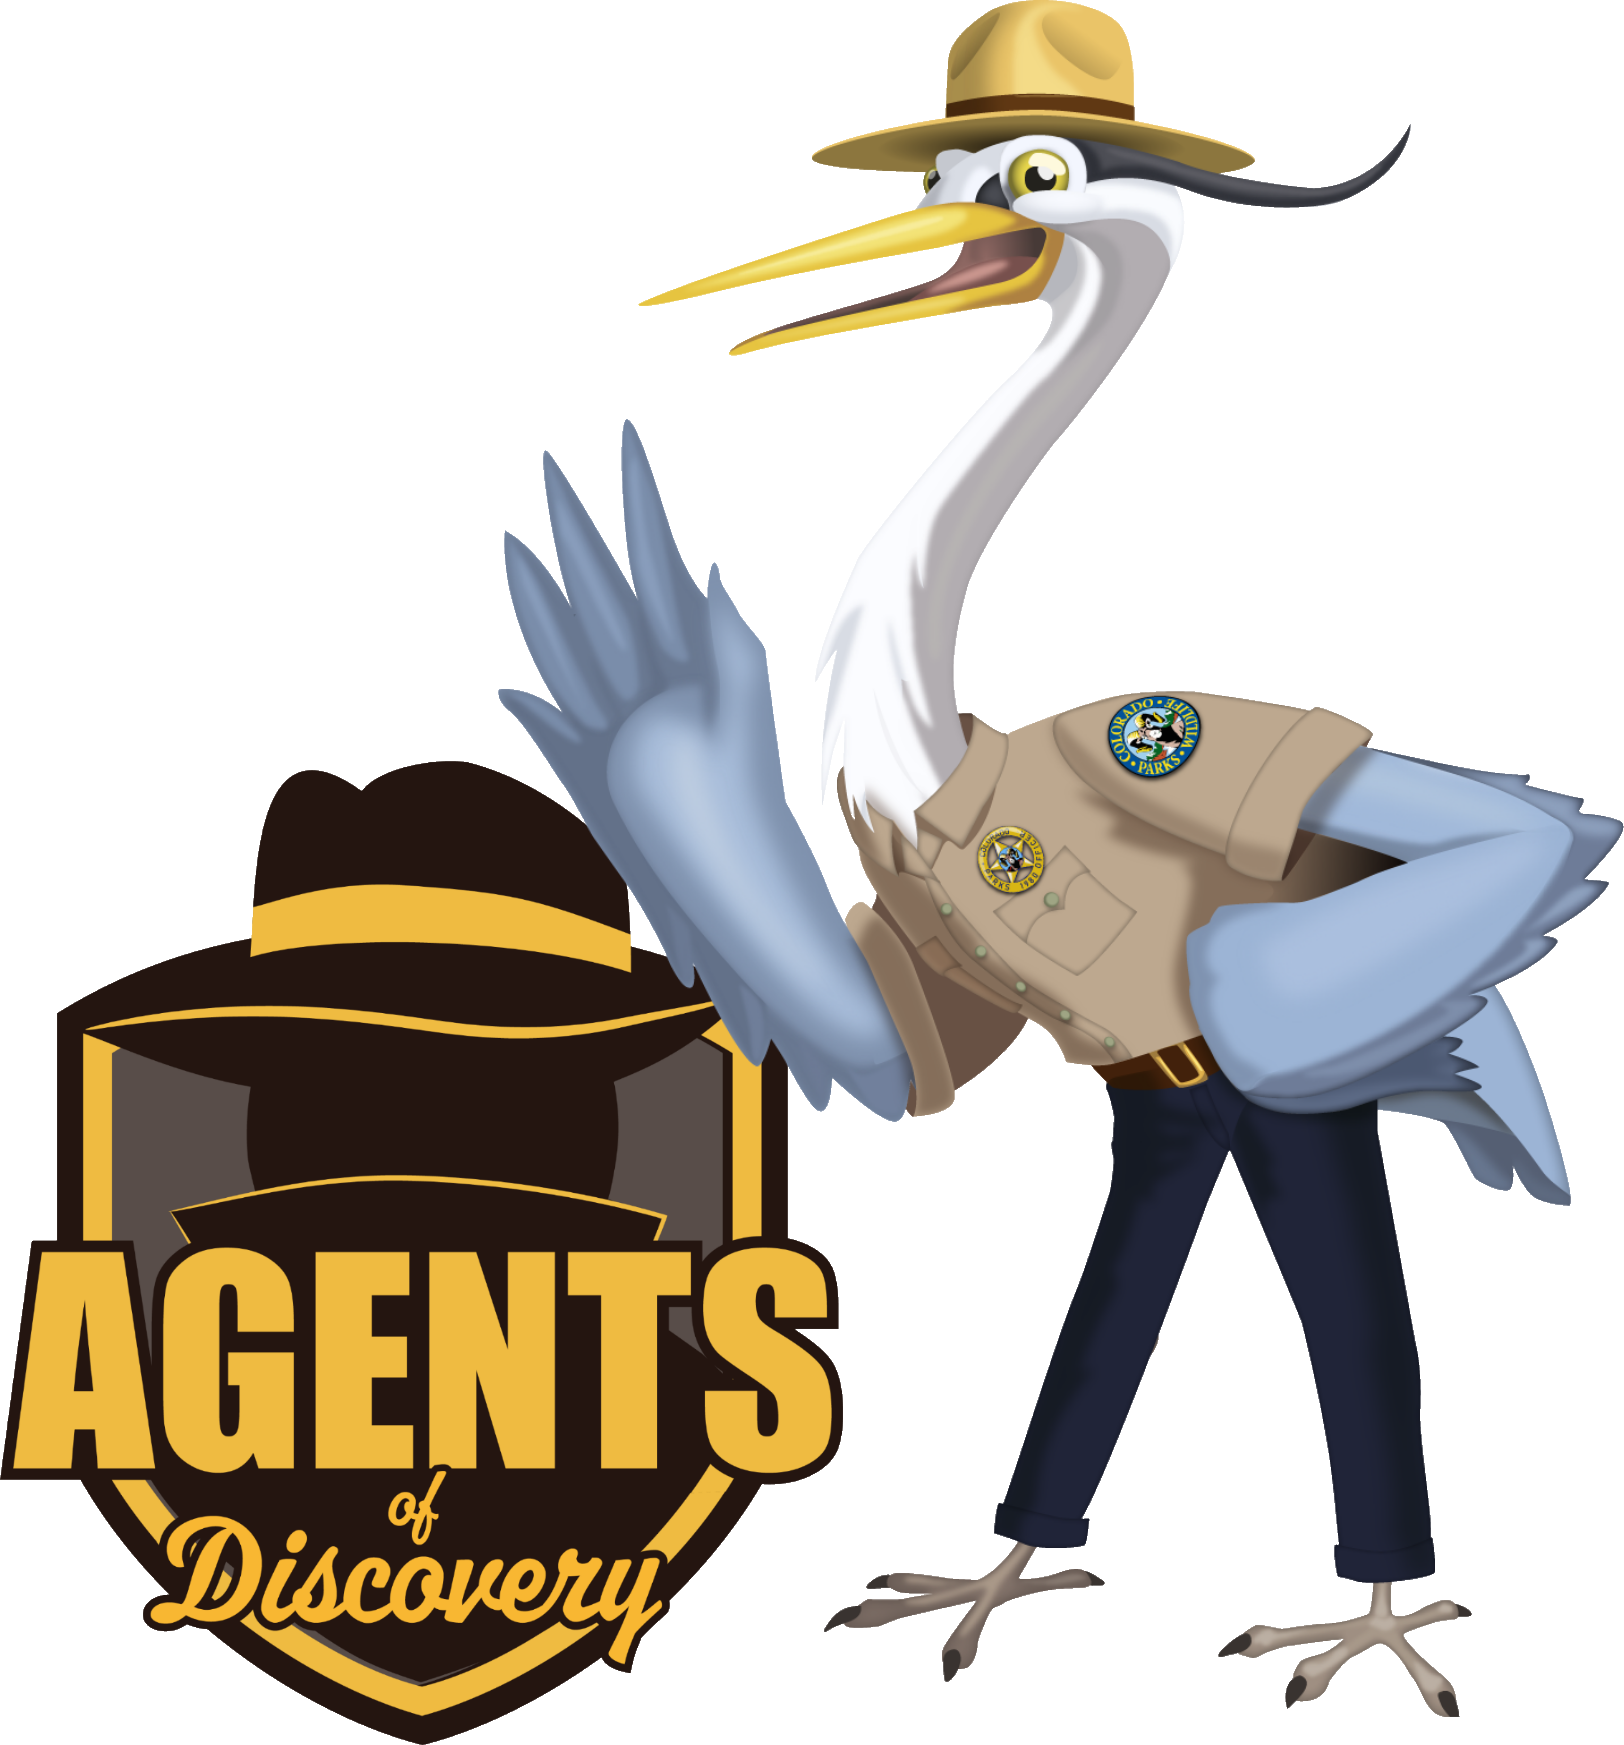 Agents of Discovery Logo with Blue Heron Agent